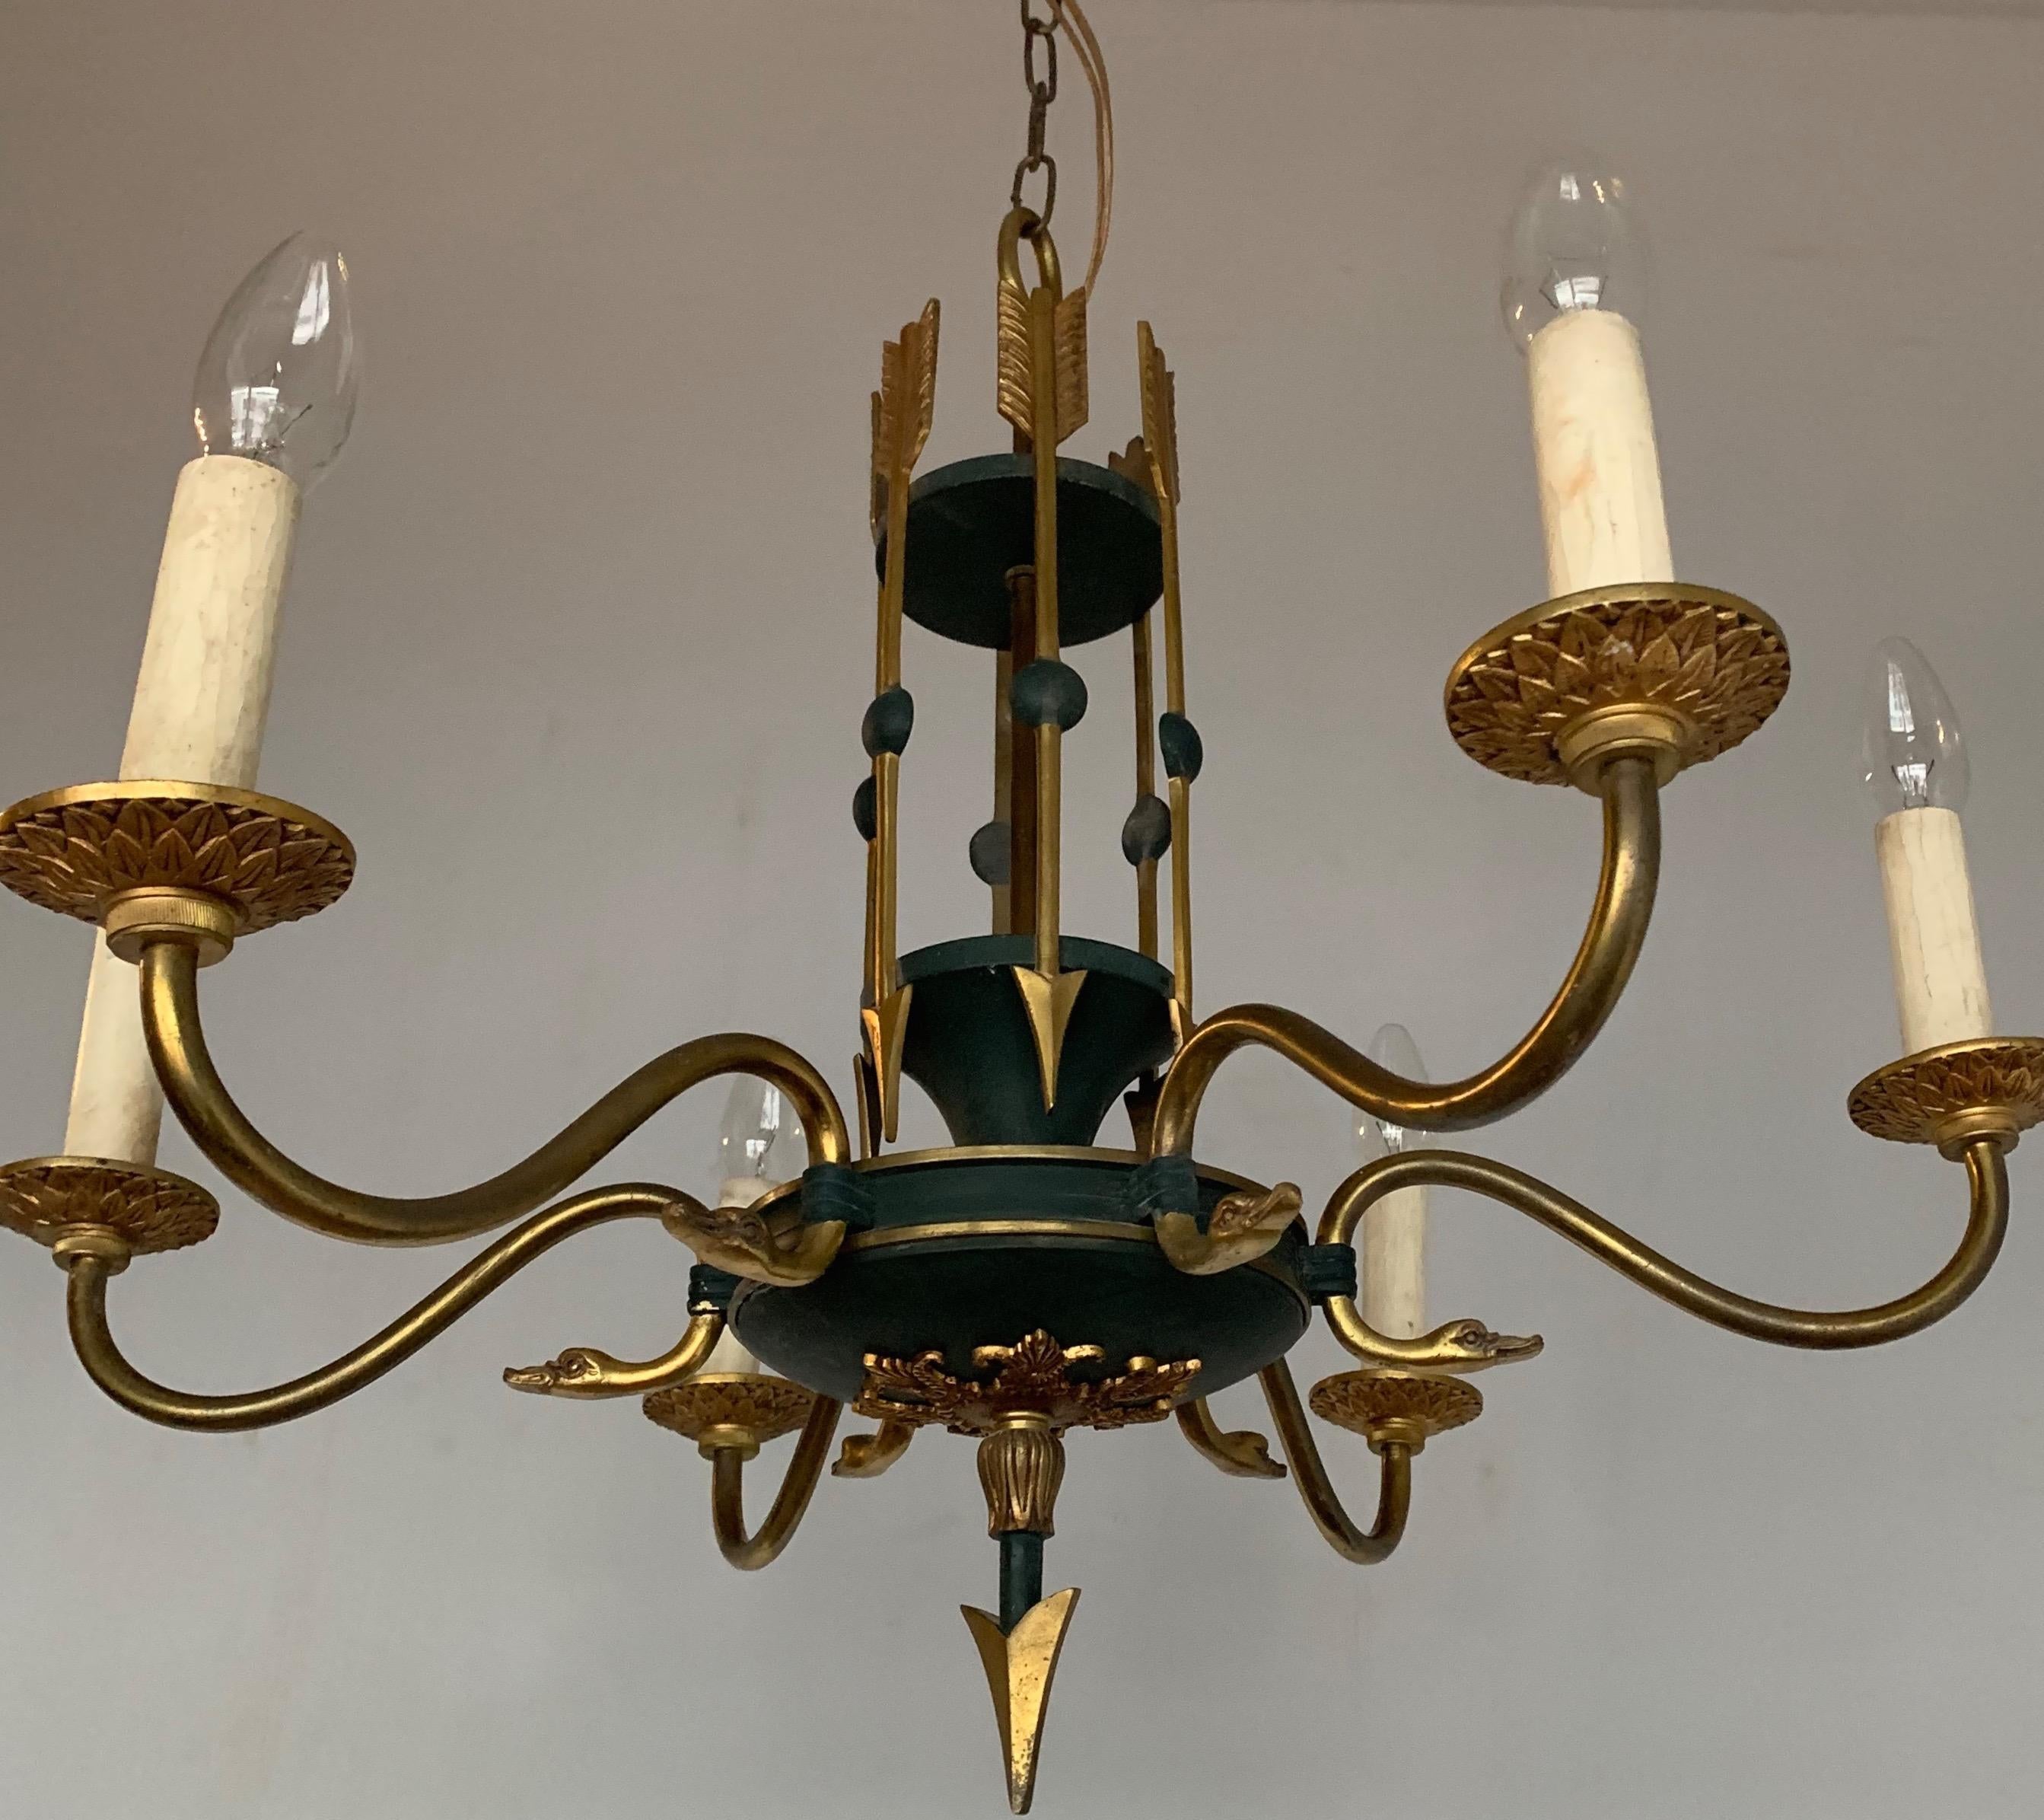 Stylish Empire Revival Six-Light Pendant Chandelier with Swan Heads and Arrows For Sale 11